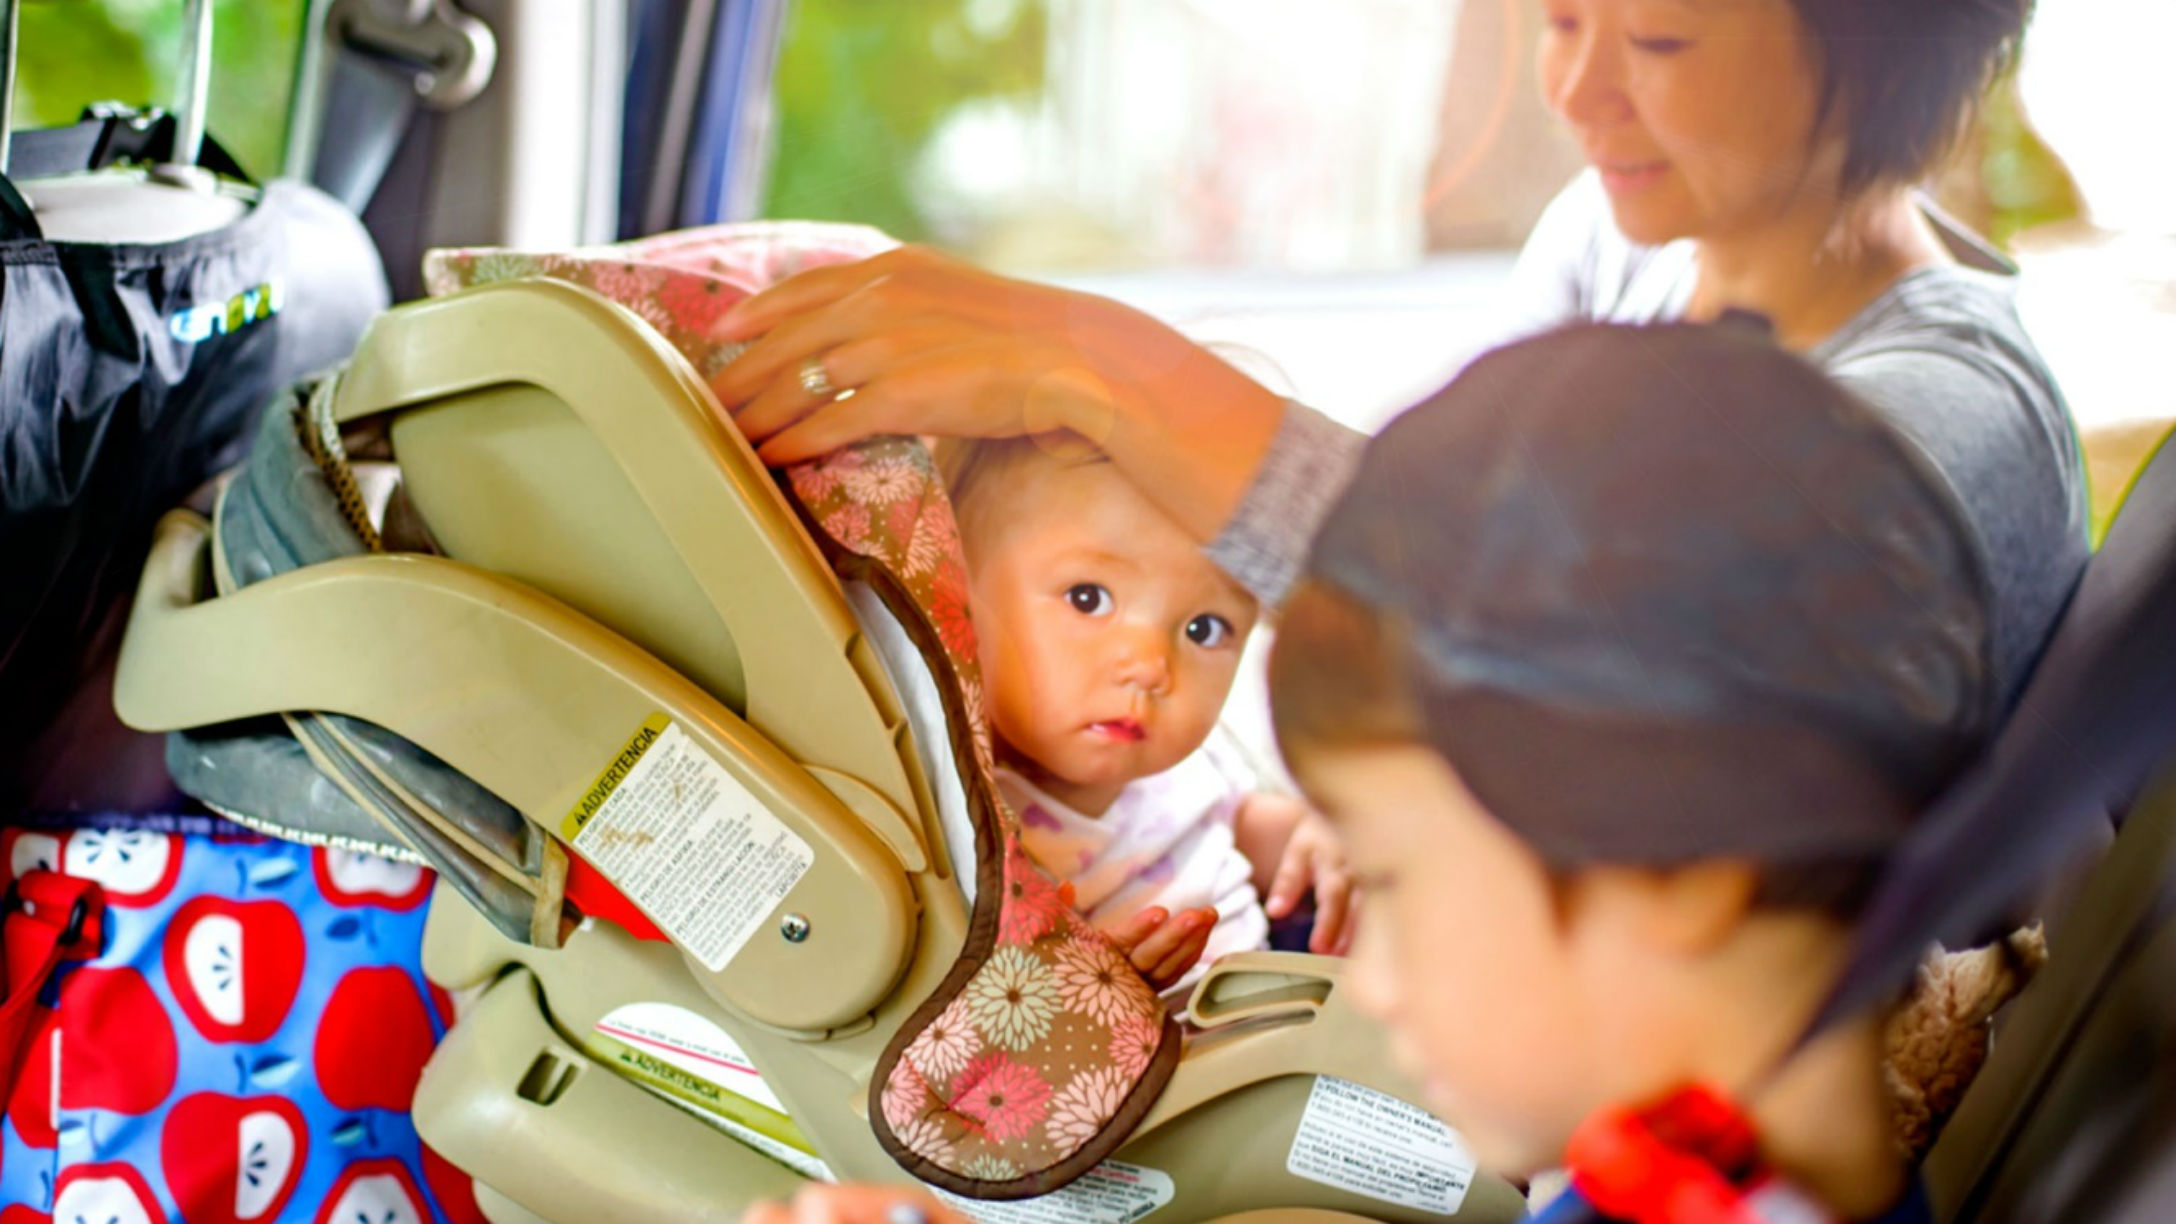 When Do I Need To Switch My Baby to a Convertible Car Seat?